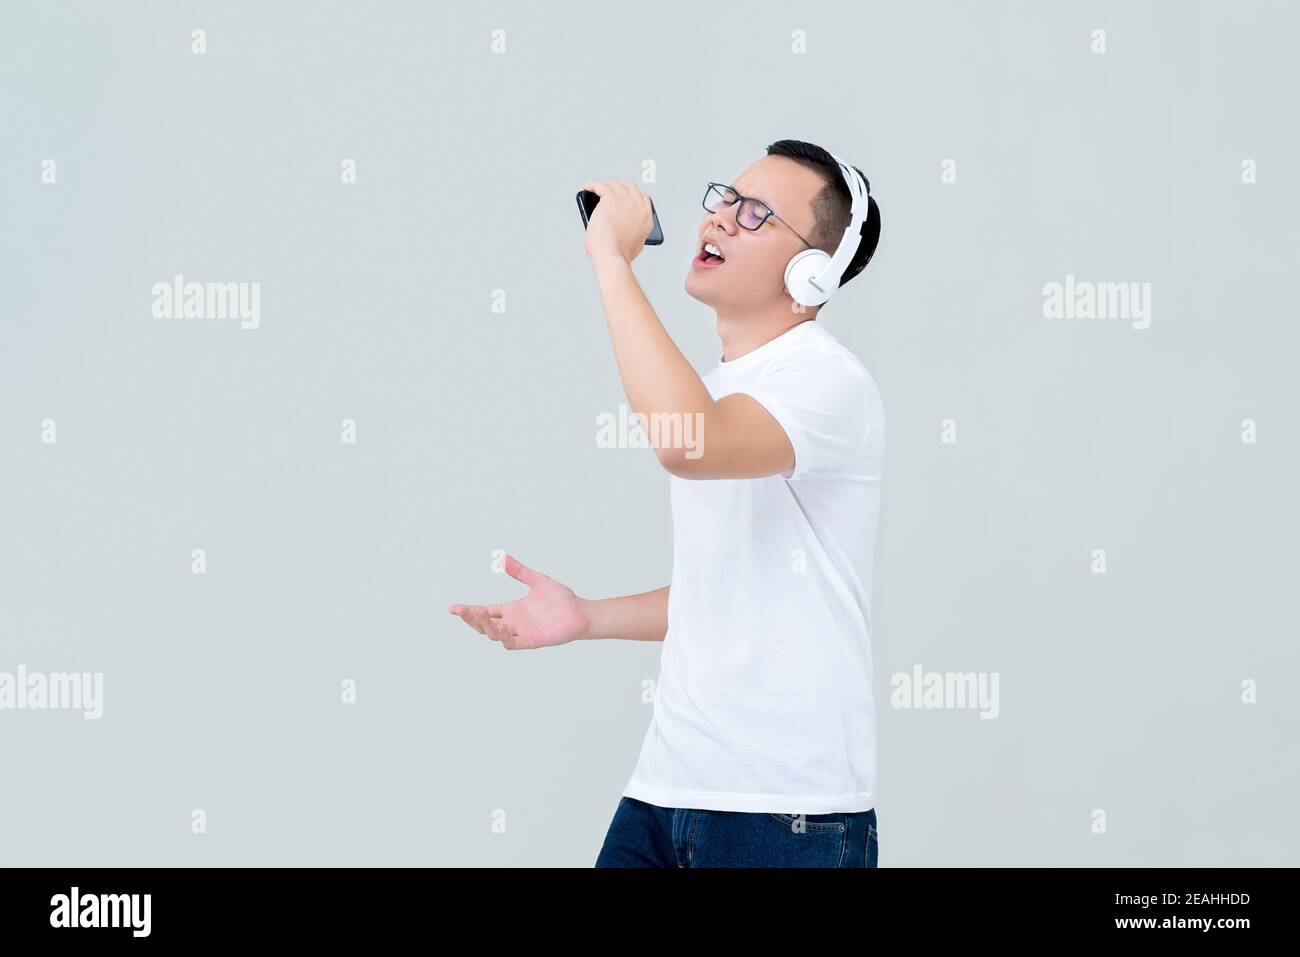 Young Asian man wearing headphones listening to music from mobile phone and singing isolated on light gray background Stock Photo